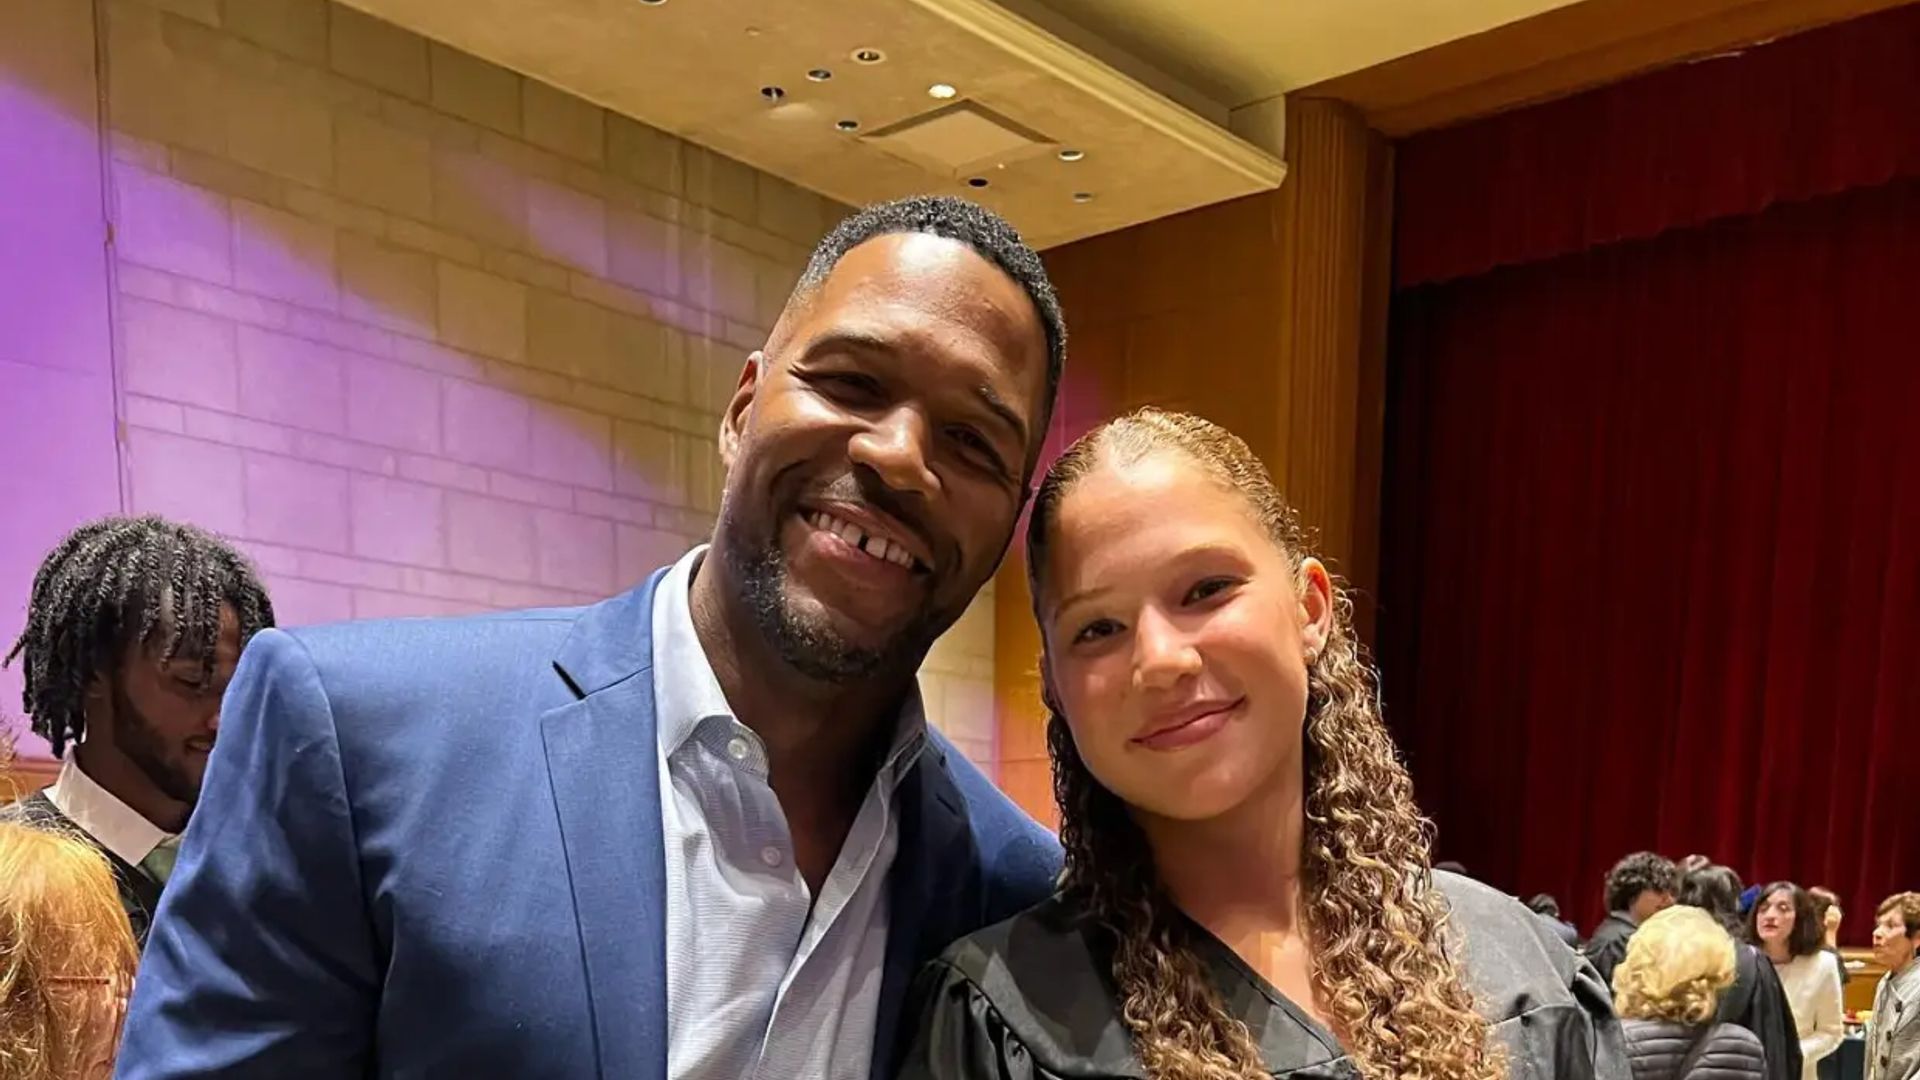 Michael Strahan’s daughter Sophia, 19, showcases tiny waist in low rise jeans and crop top in new pics